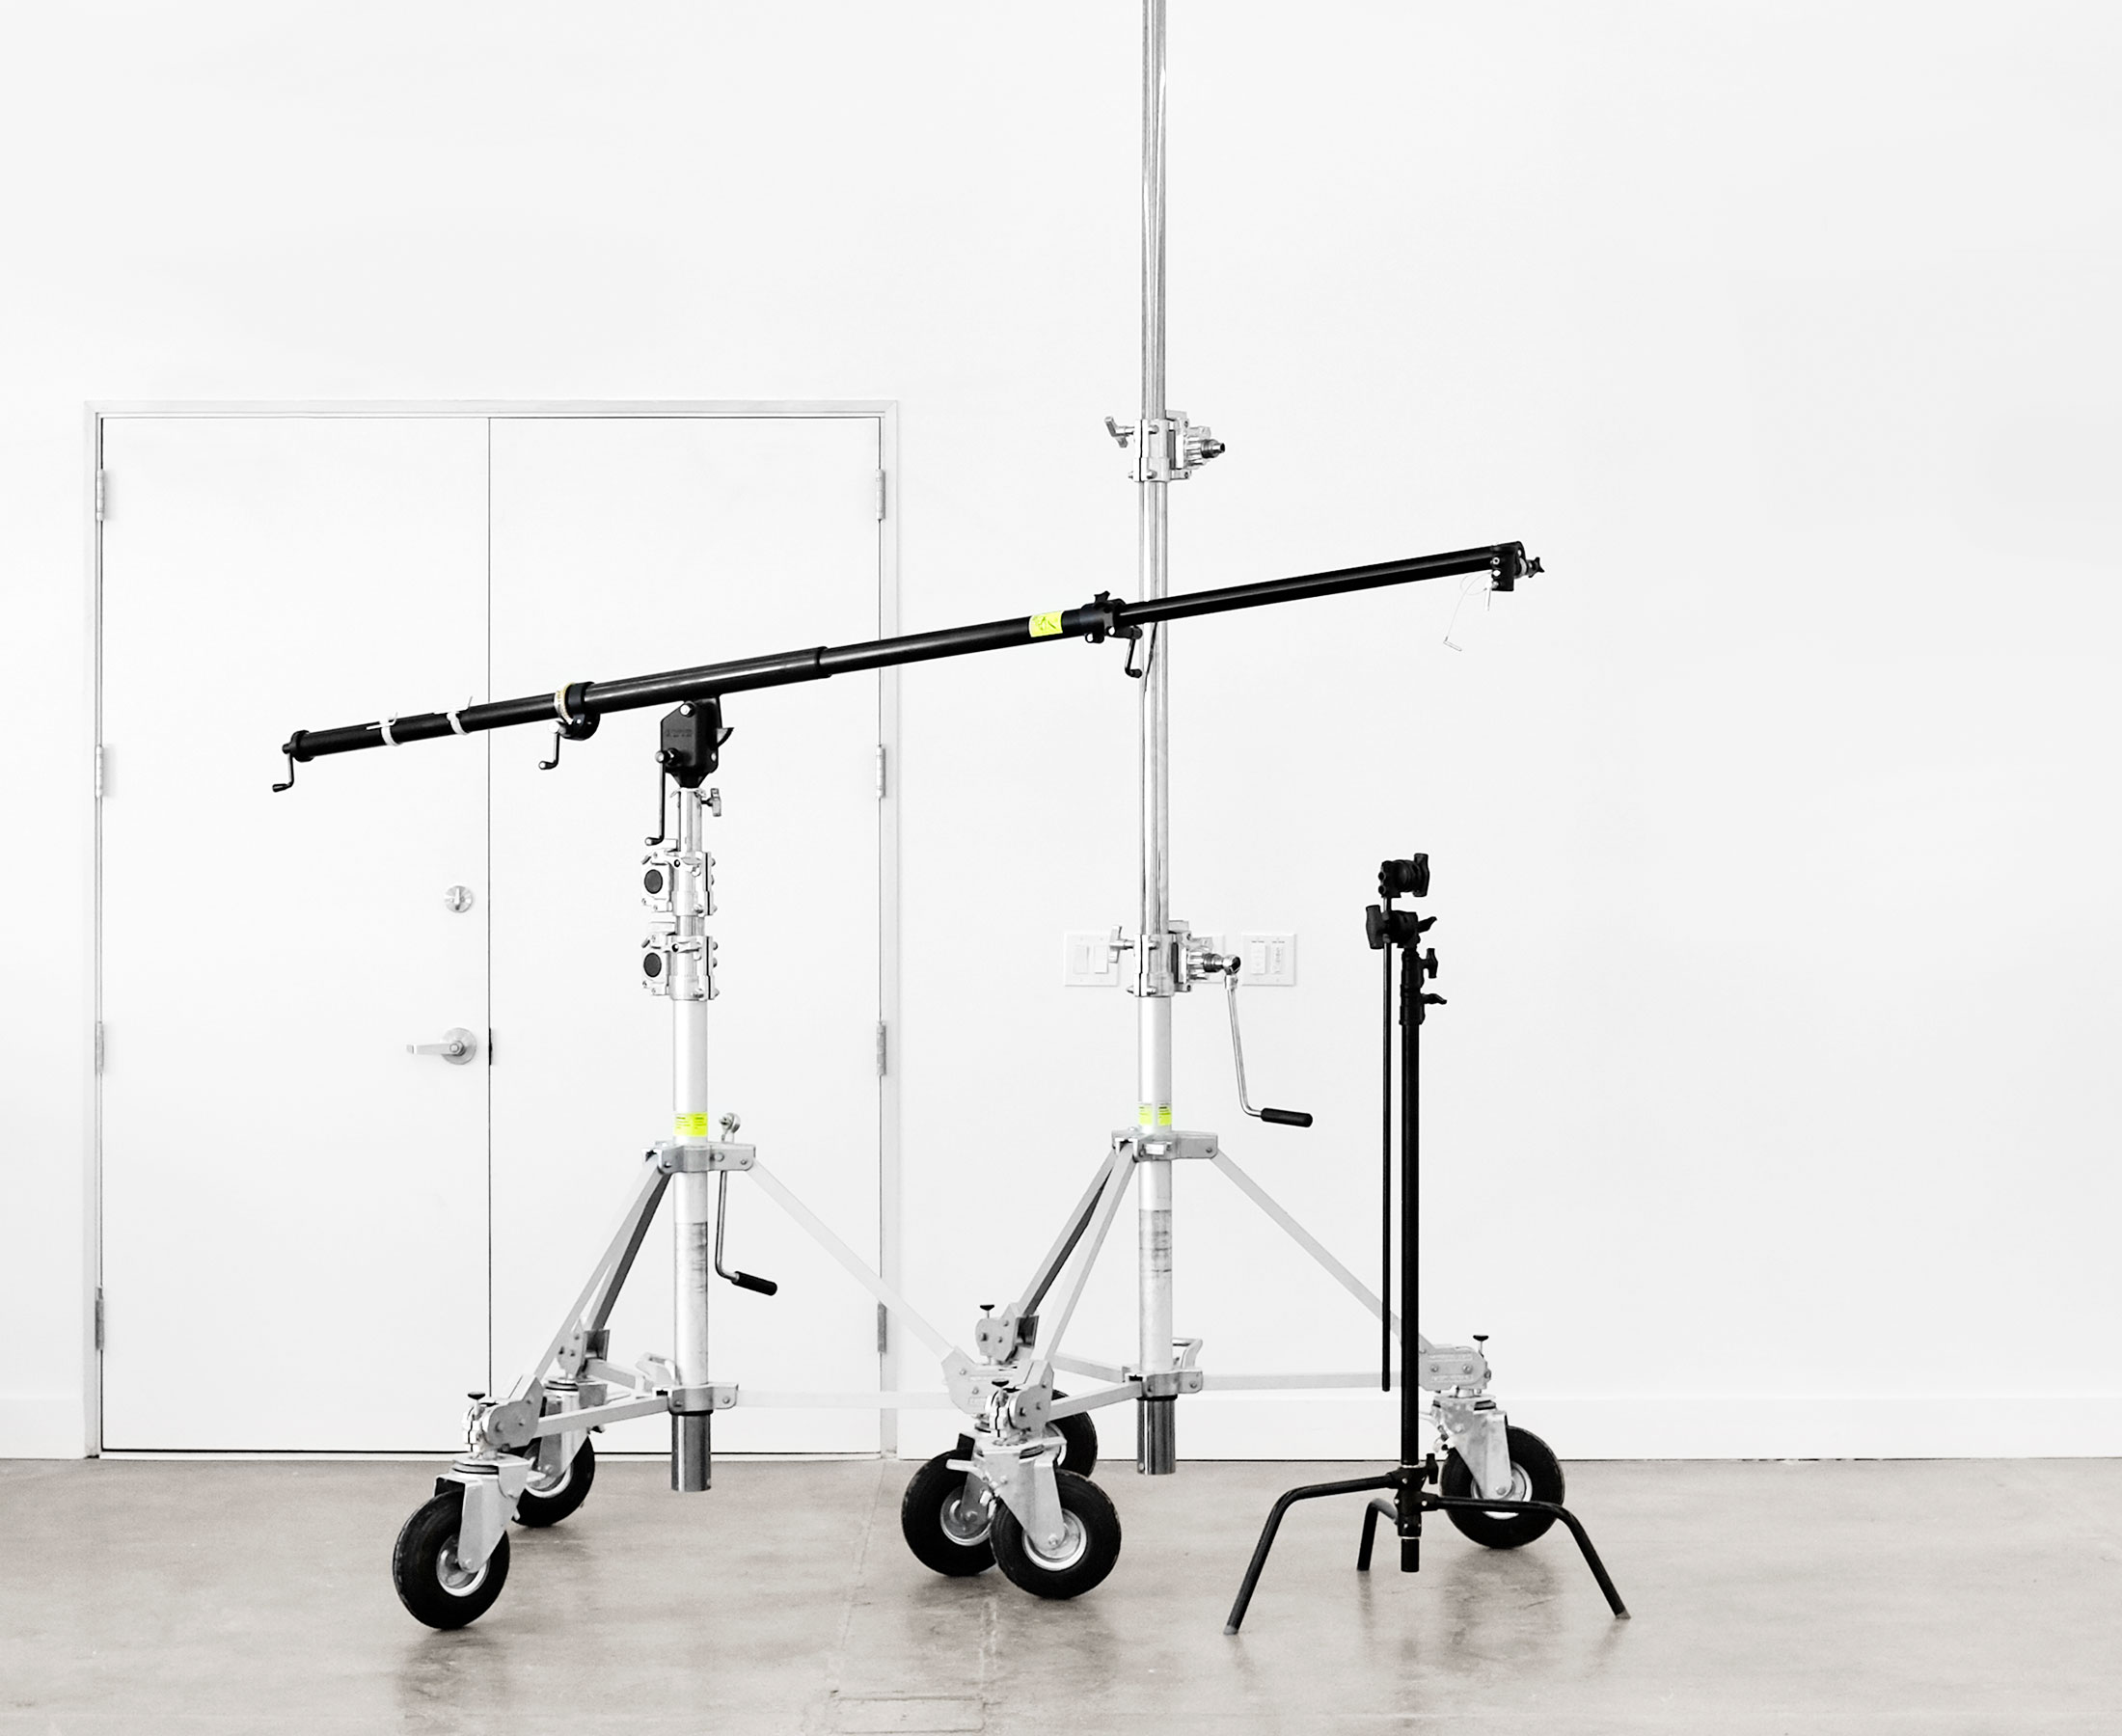 Extensive collection of rental grip, camera, and lighting equipment